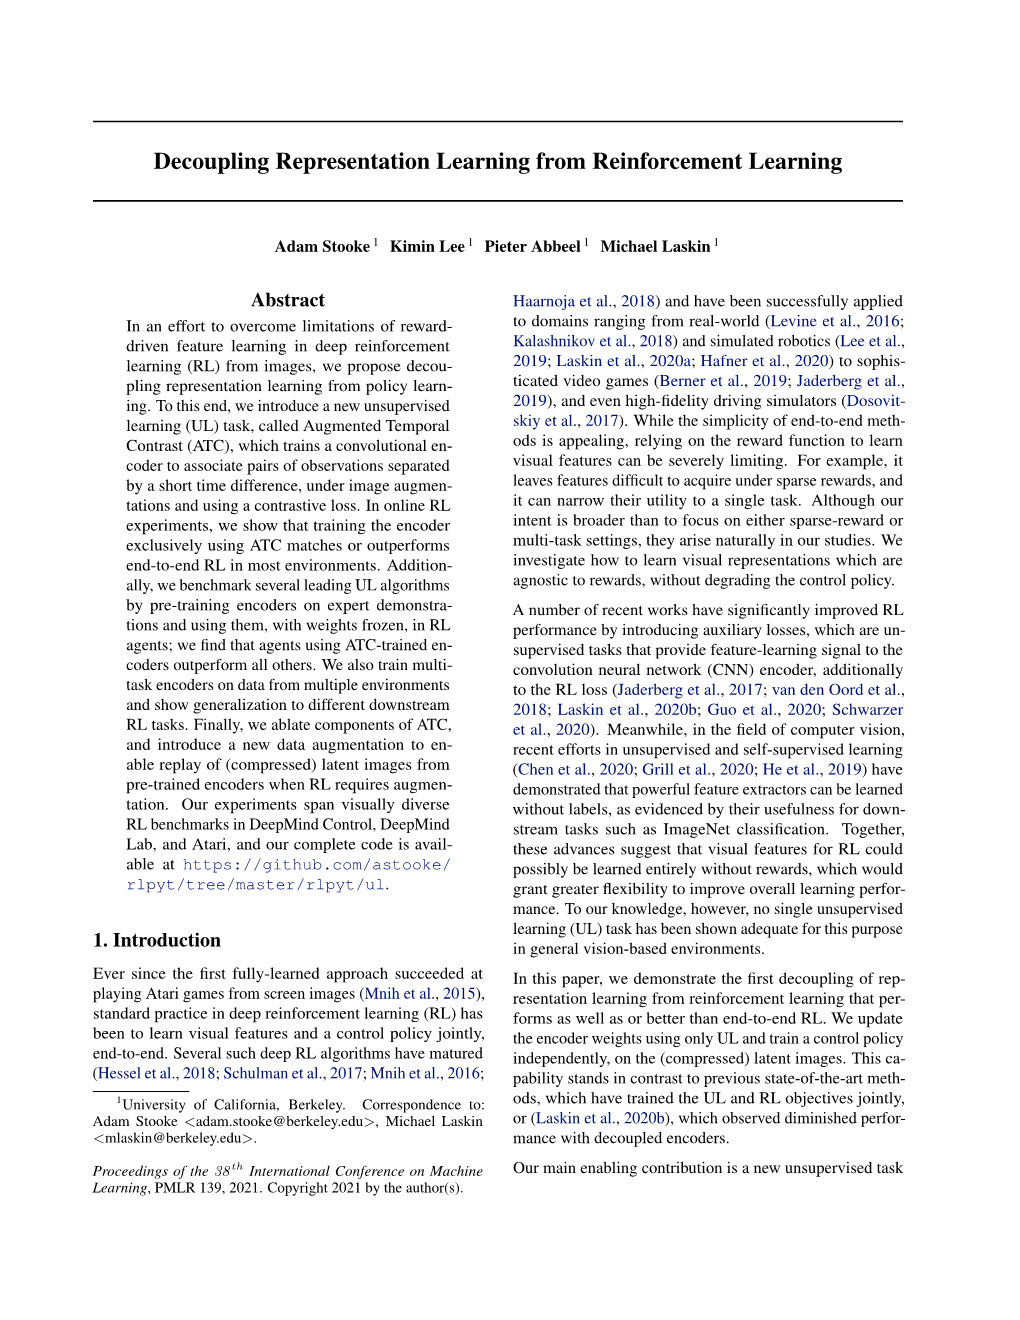 Decoupling Representation Learning from Reinforcement Learning